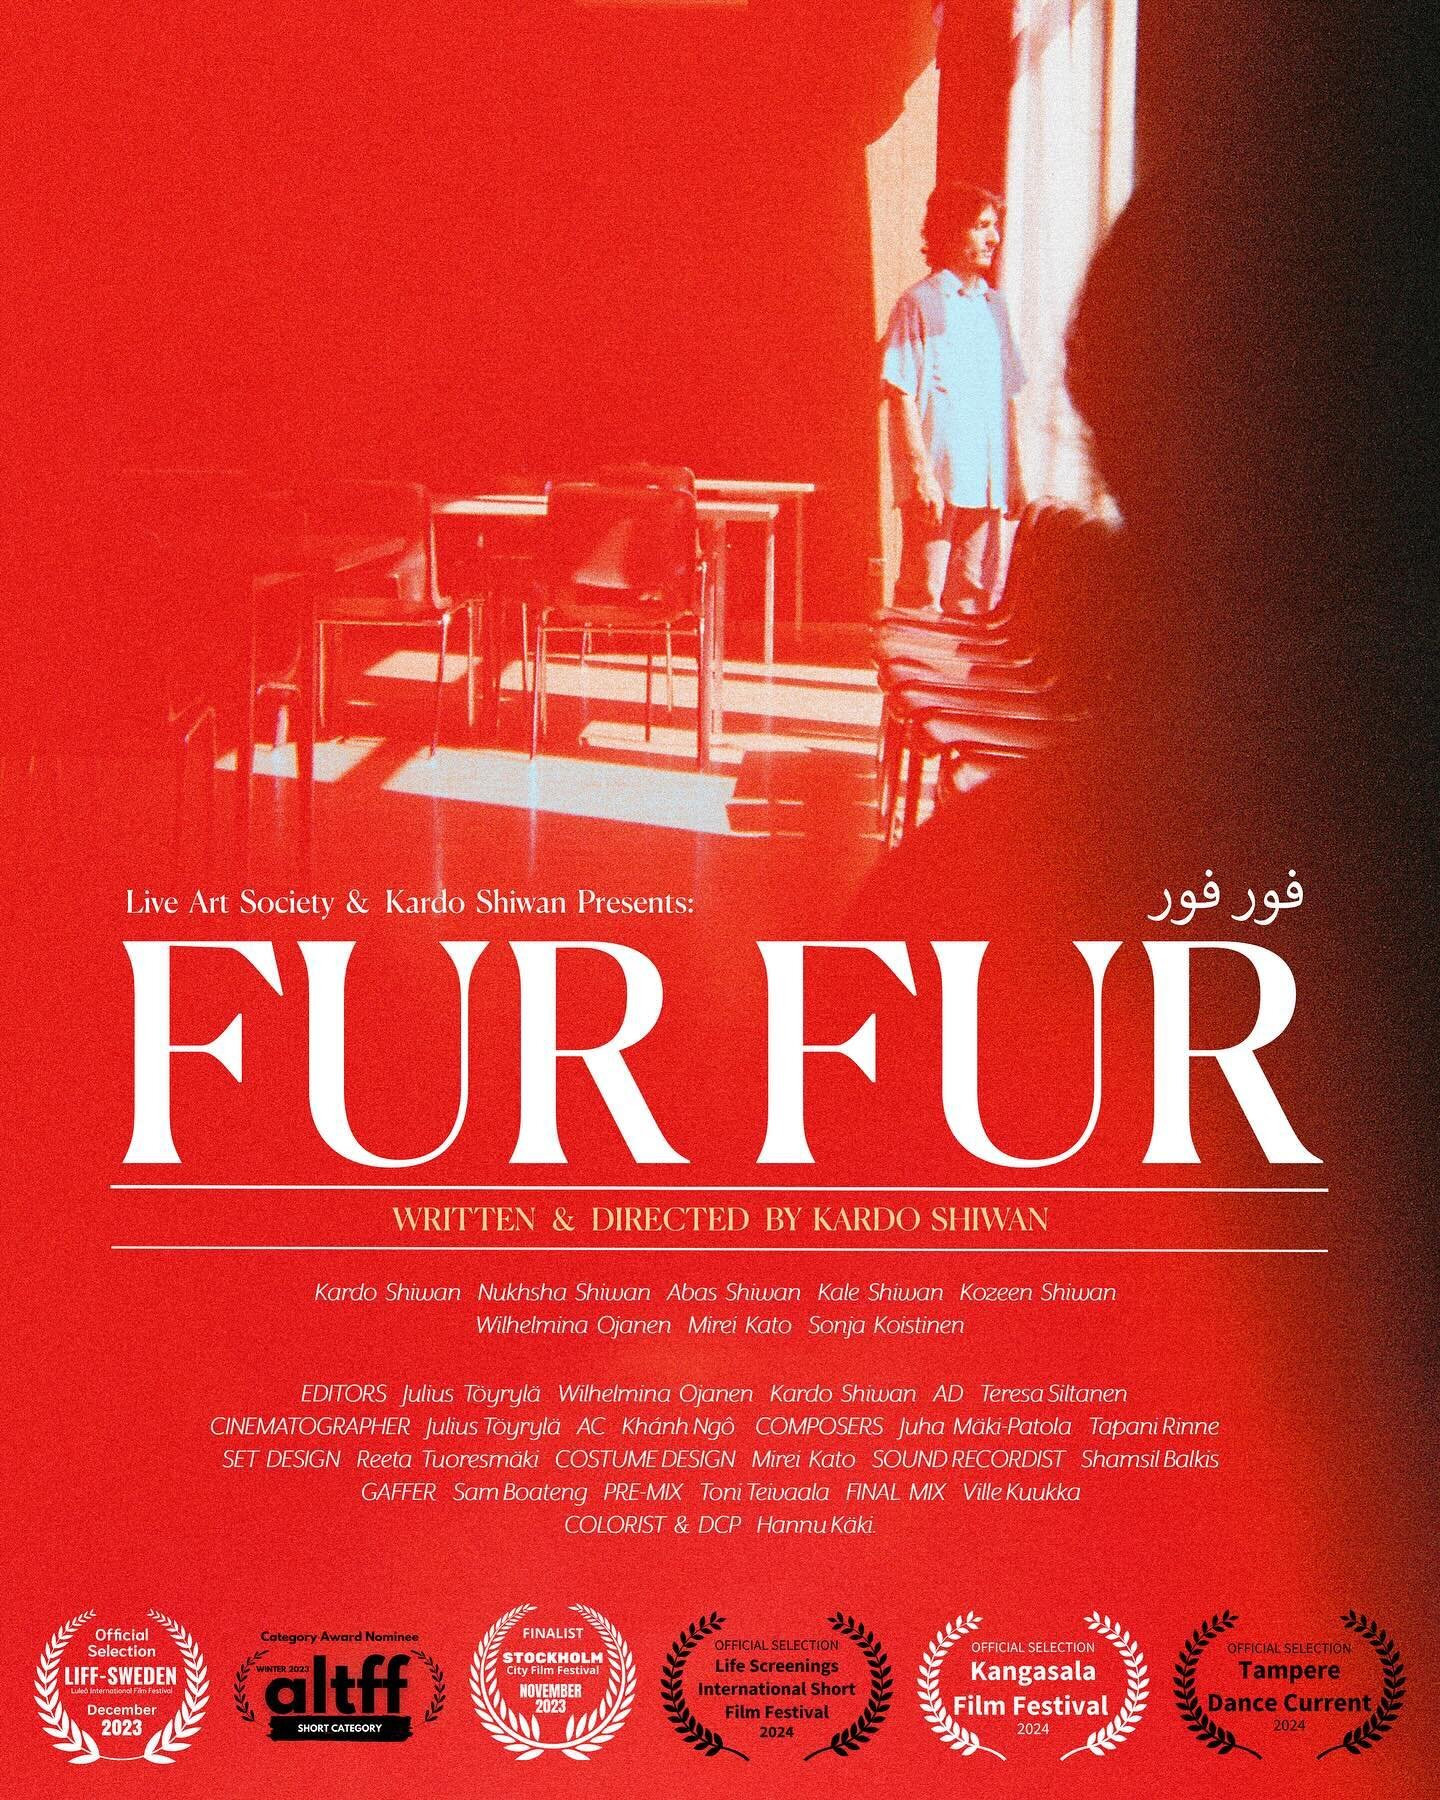 Check out this gorgeous poster by @juliustoyryla created for FUR FUR short film by @ckkardo &amp; team ❤️

This week is exciting, as FUR FUR short film will have its national premiere on the big screen at @kangasala_film_festival as part of the festi